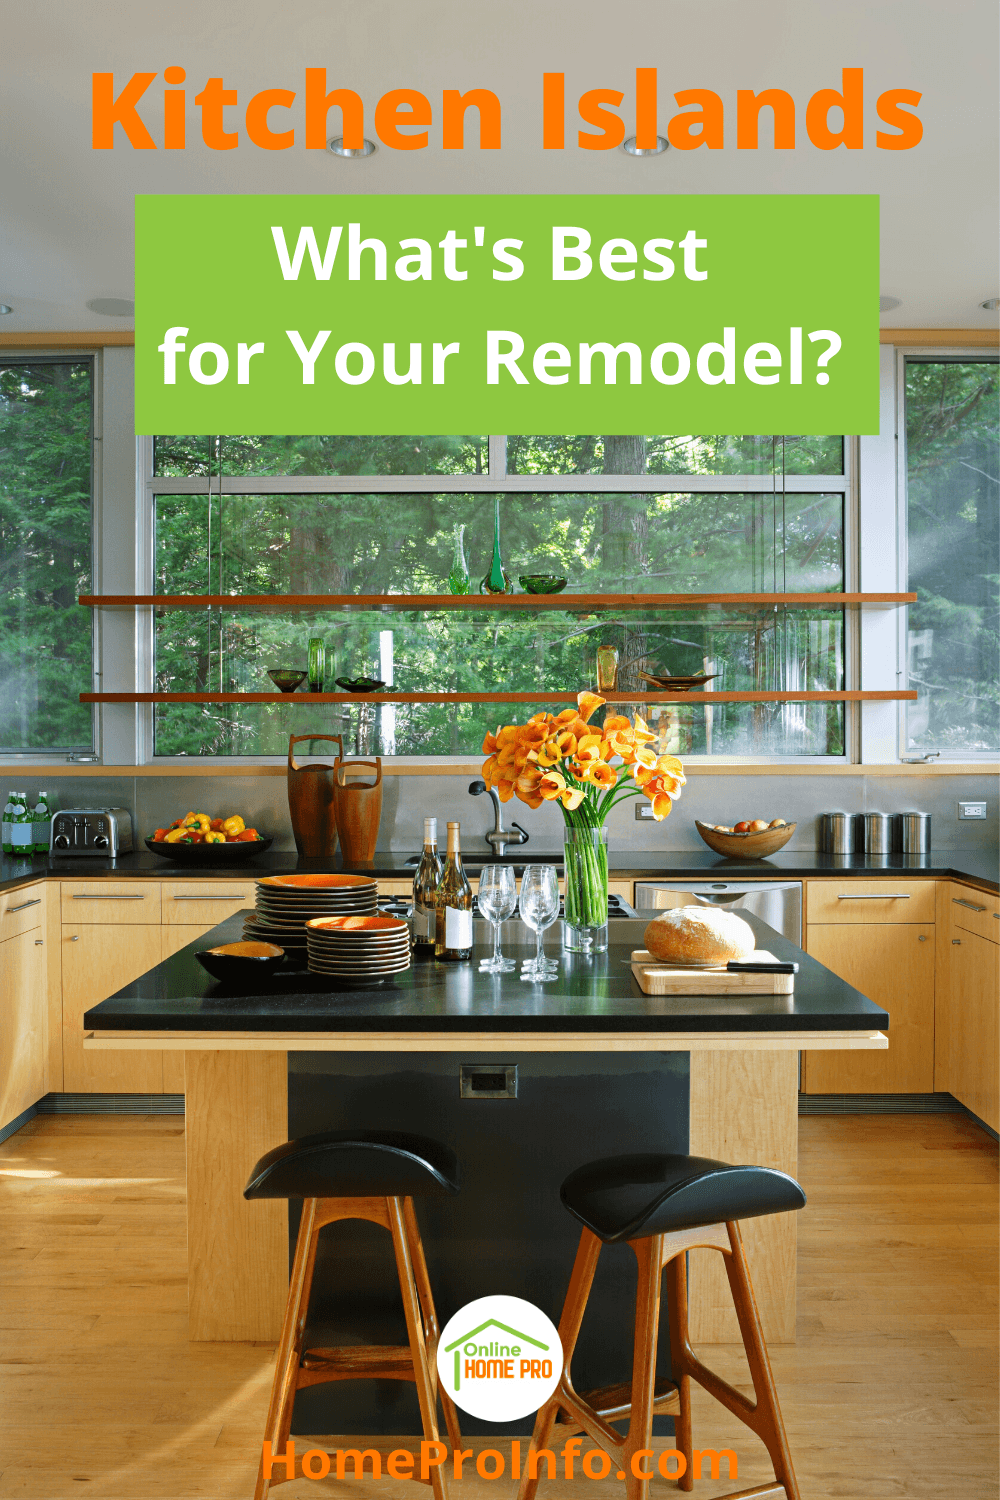 kitchen islands and remodeling